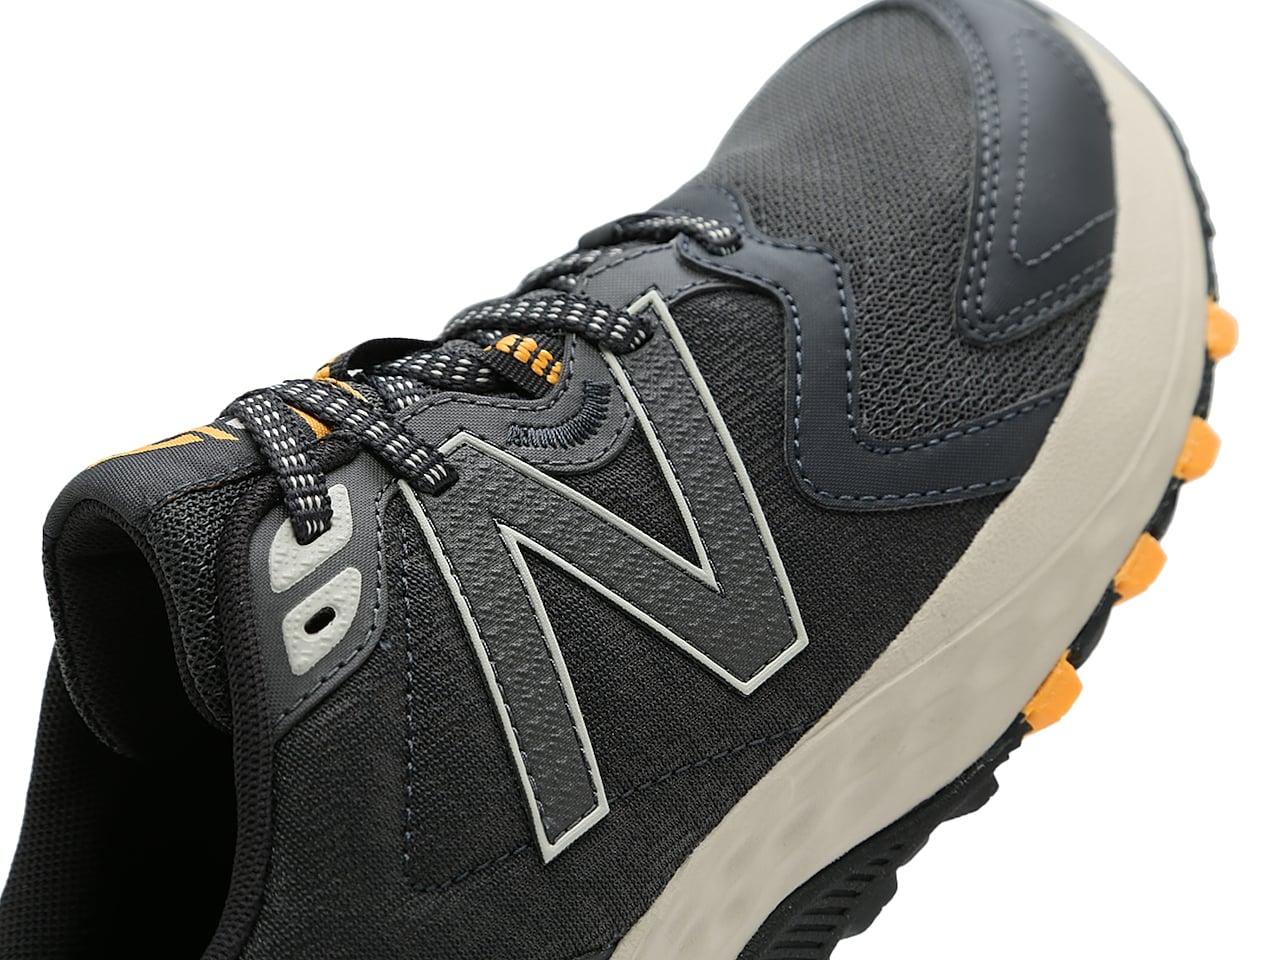 New Balance Synthetic 410 V7 Trail Running Shoe in Charcoal/Yellow/Black  (Black) for Men - Lyst